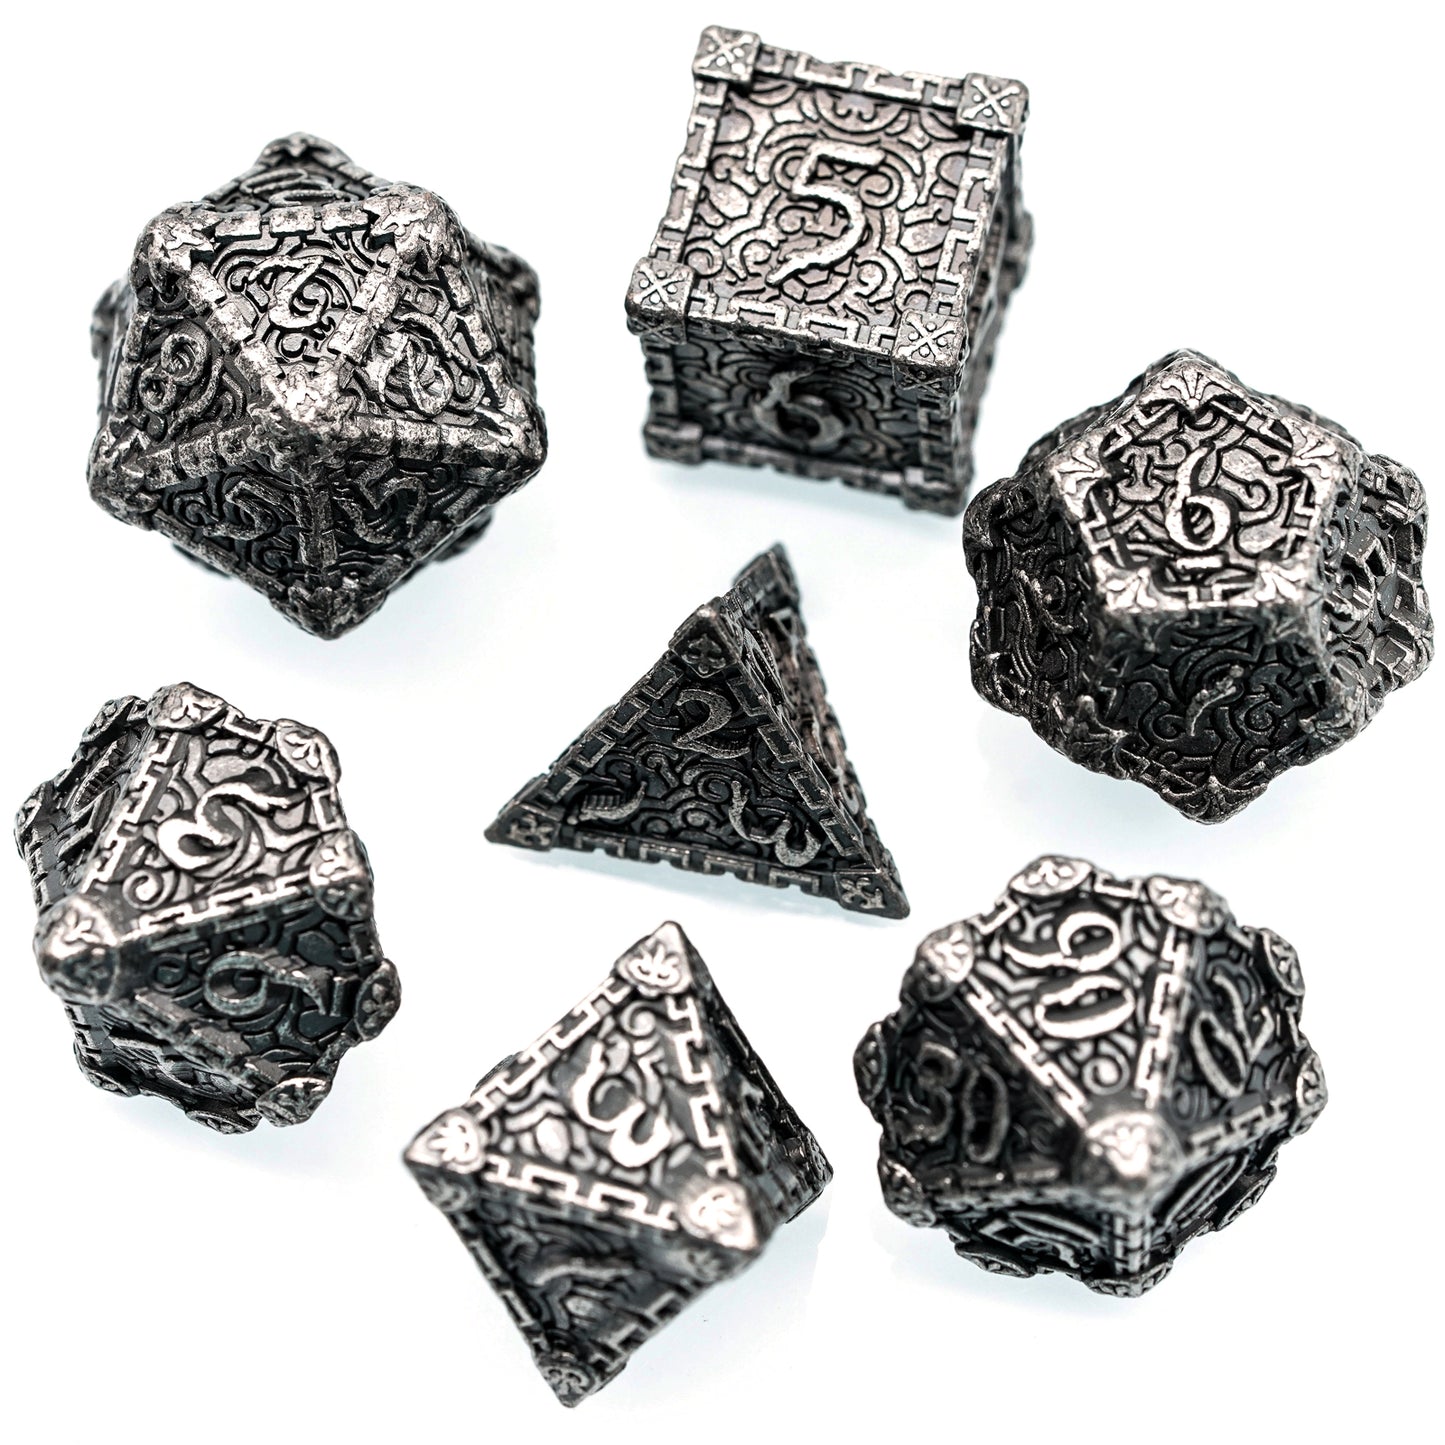 7 piece silver metal dice set arranged in circle on white background